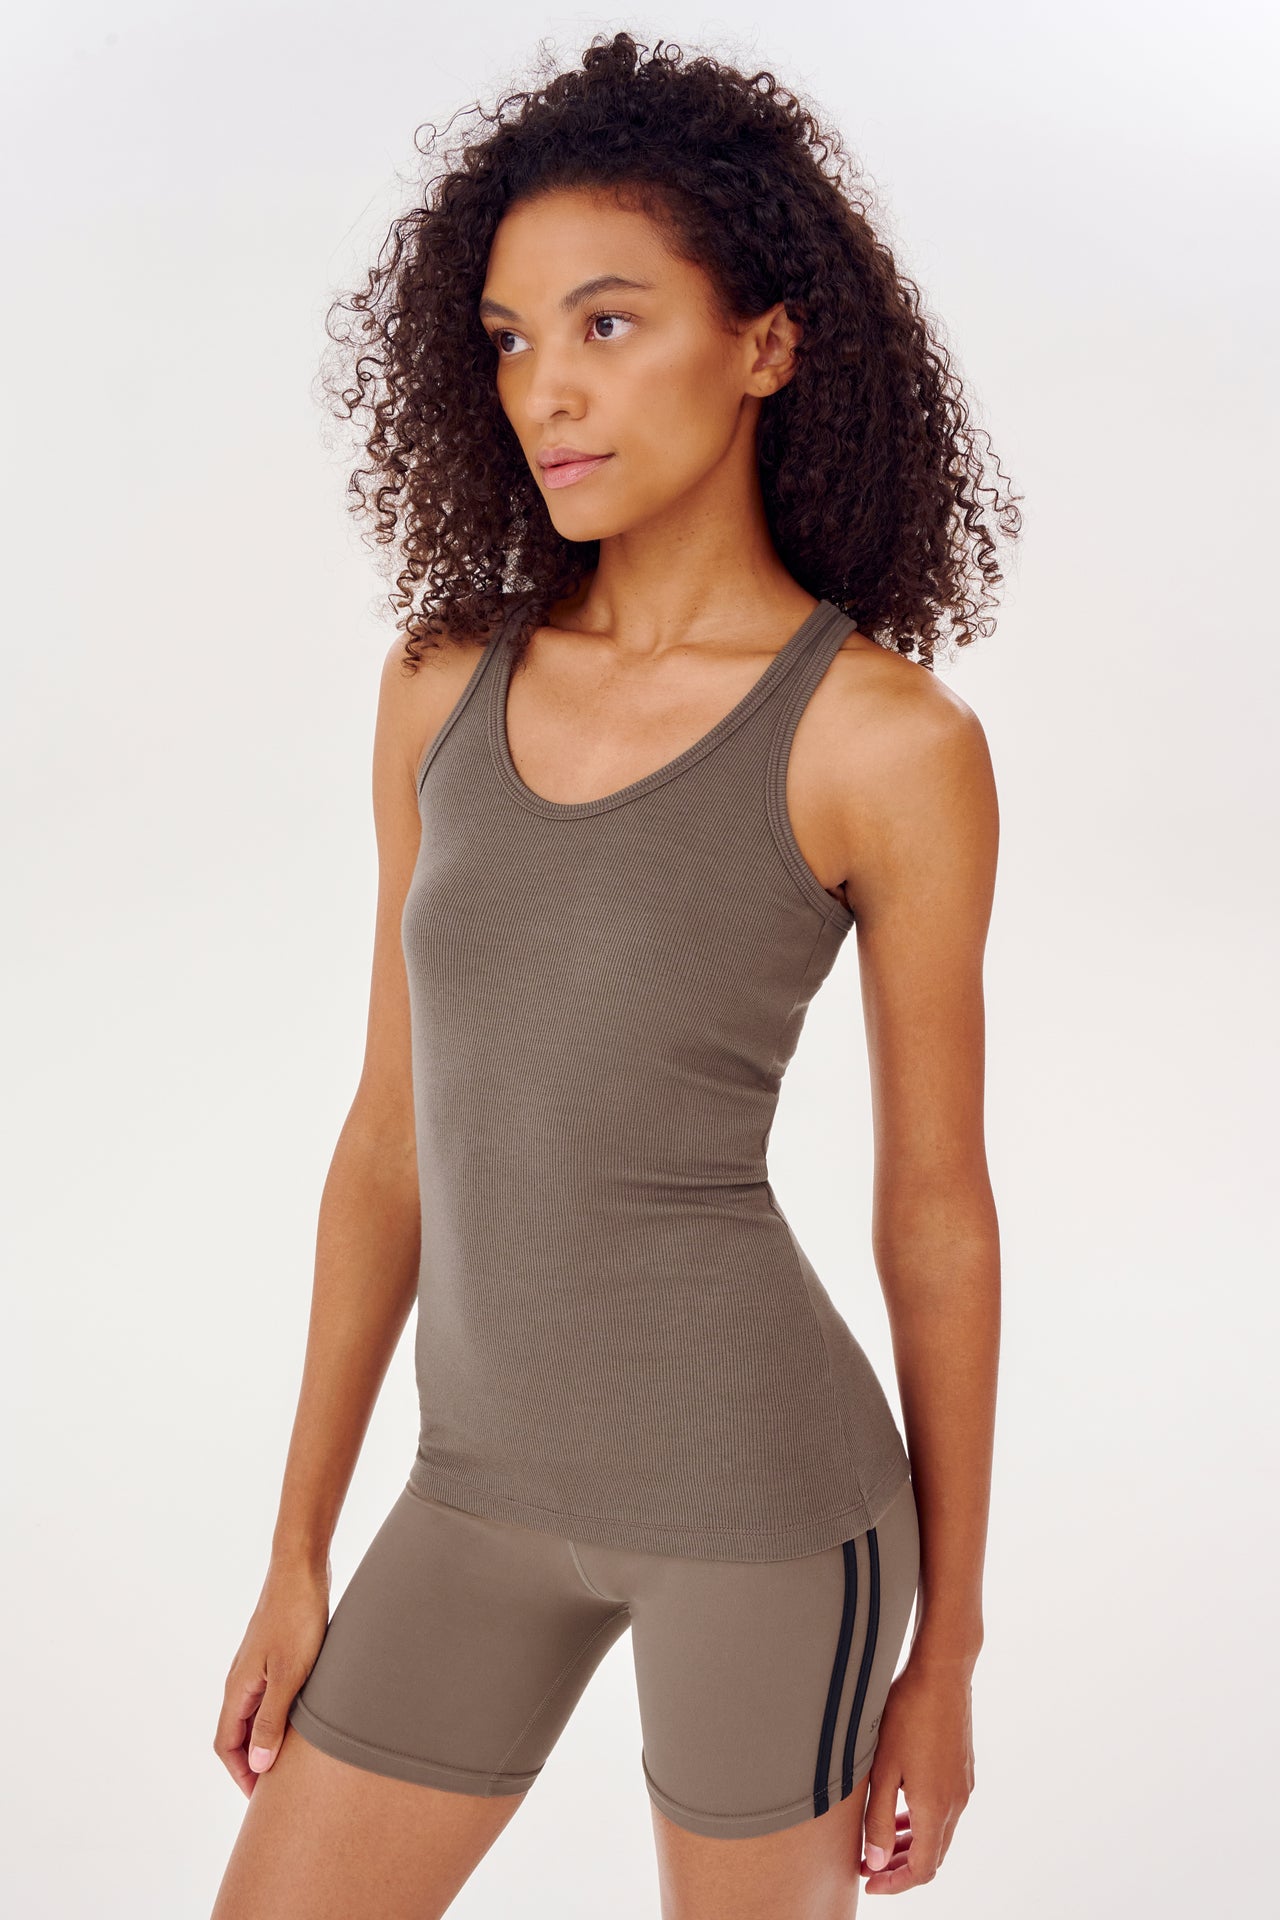 A woman wearing a SPLITS59 Ashby Rib Tank in Lentil and shorts.